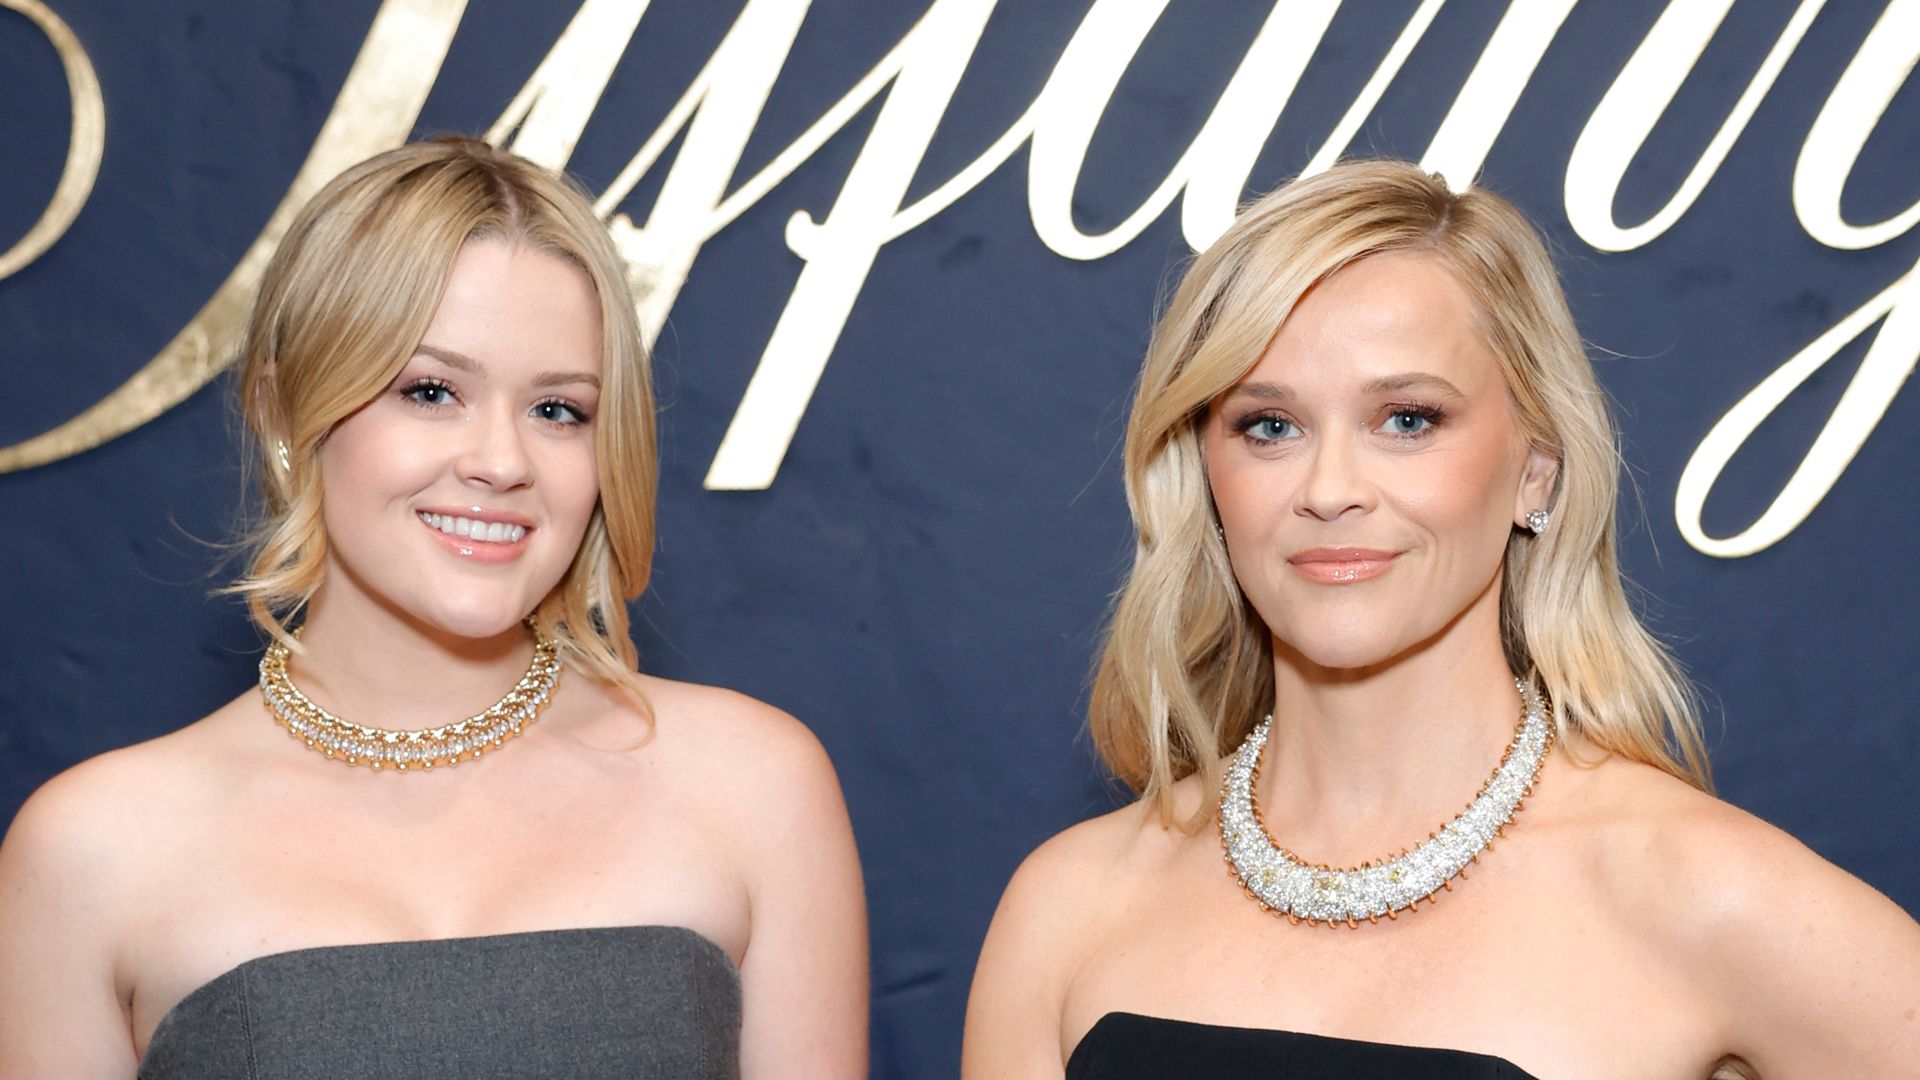 Reese Witherspoon's lookalike daughter Ava displays tattooed physique in stunning joint appearance